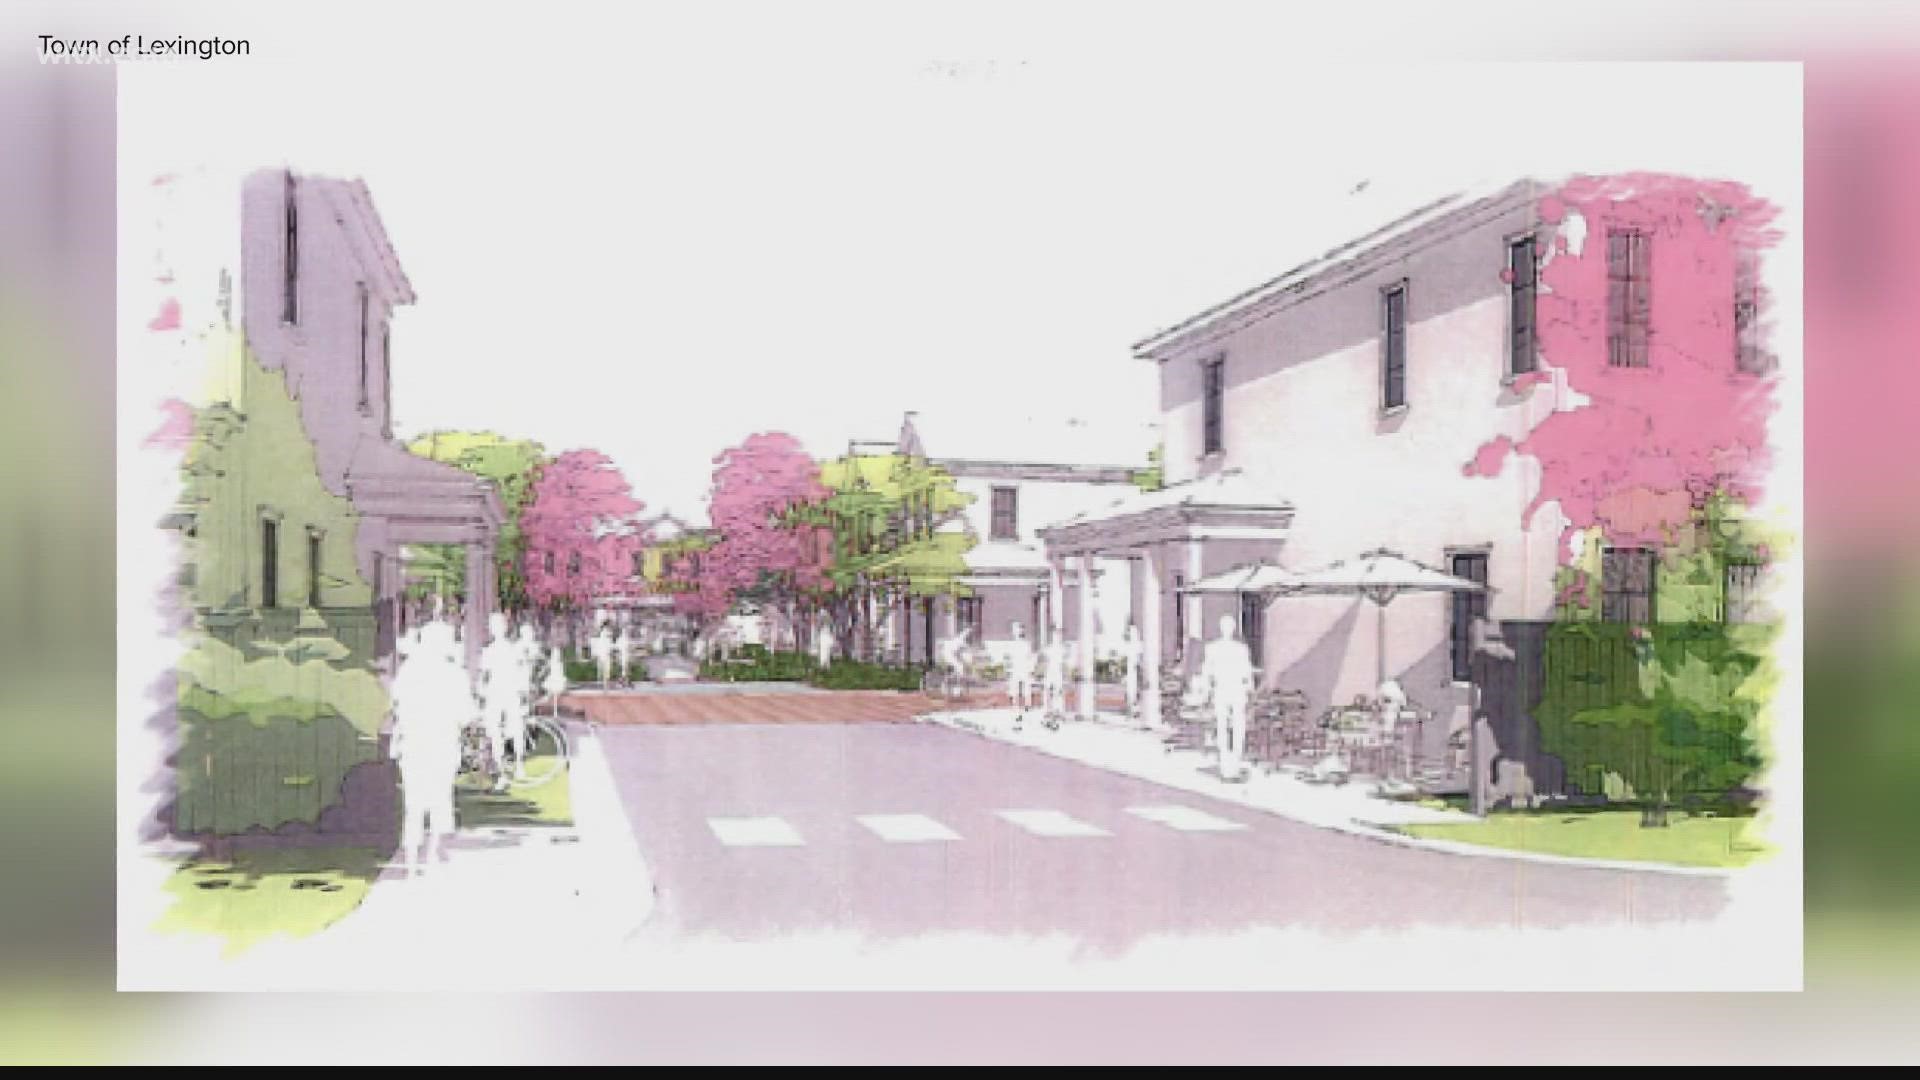 One of those projects includes a 31-unit townhome development behind the Shoppes at Flight Deck.